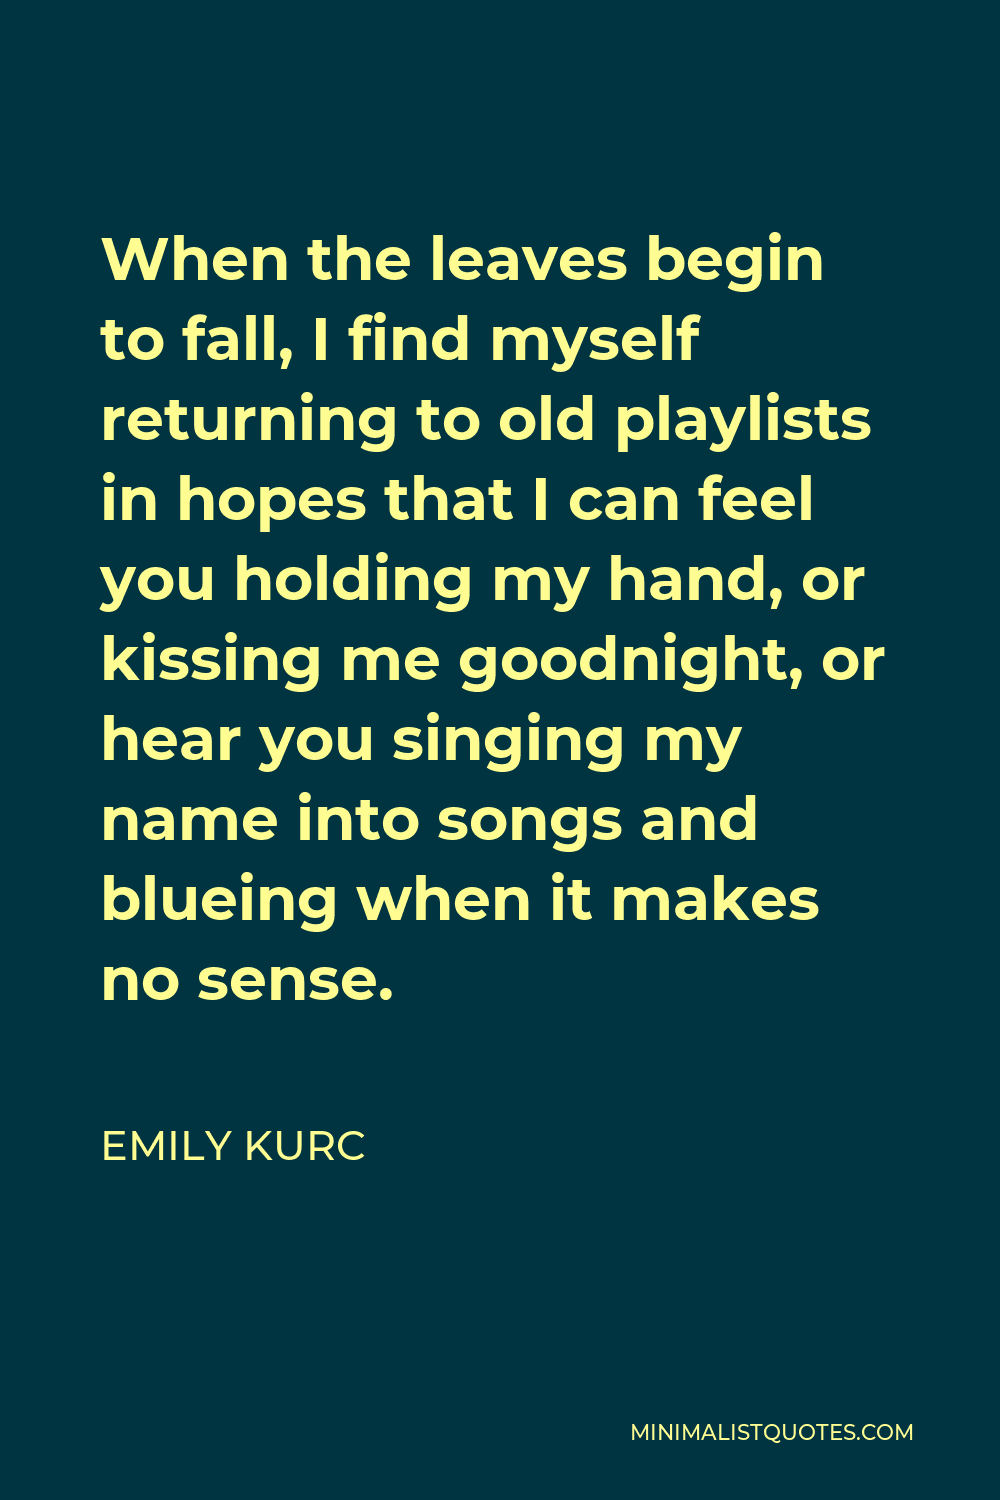 Emily Kurc Quote - When the leaves begin to fall, I find myself returning to old playlists in hopes that I can feel you holding my hand, or kissing me goodnight, or hear you singing my name into songs and blueing when it makes no sense.